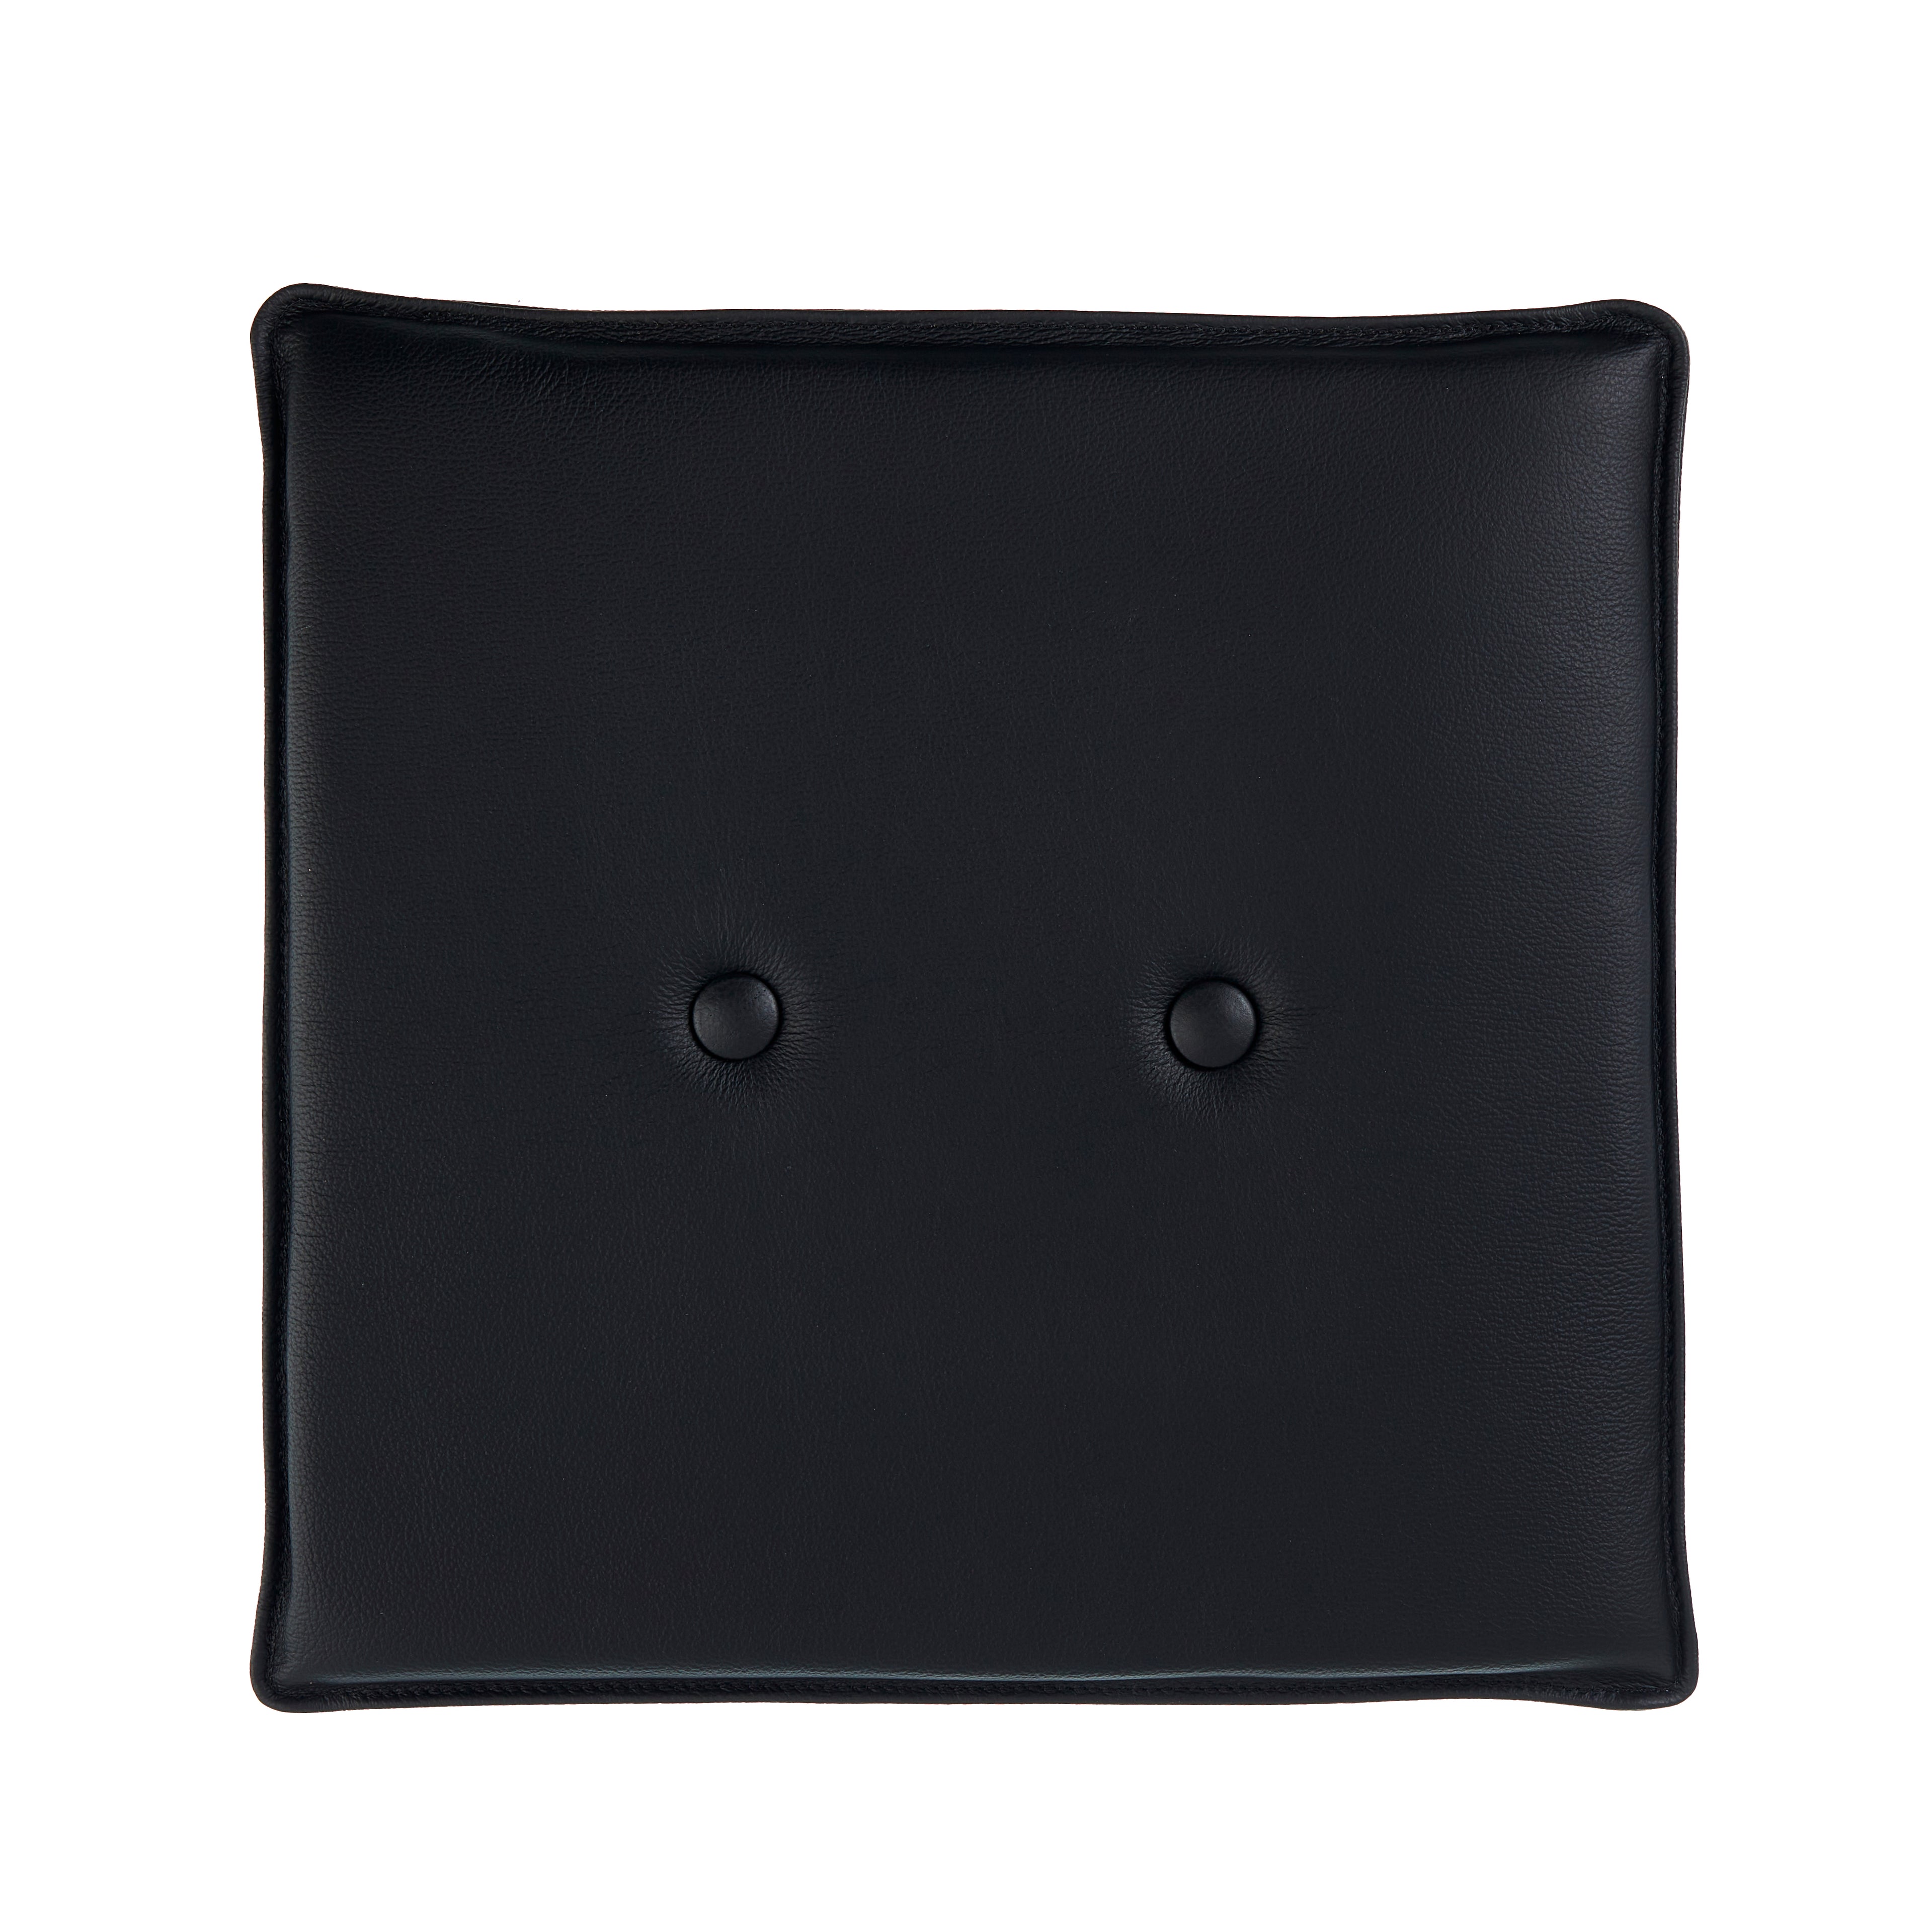 Universal cushion 40x40 cm in black leather with buttons